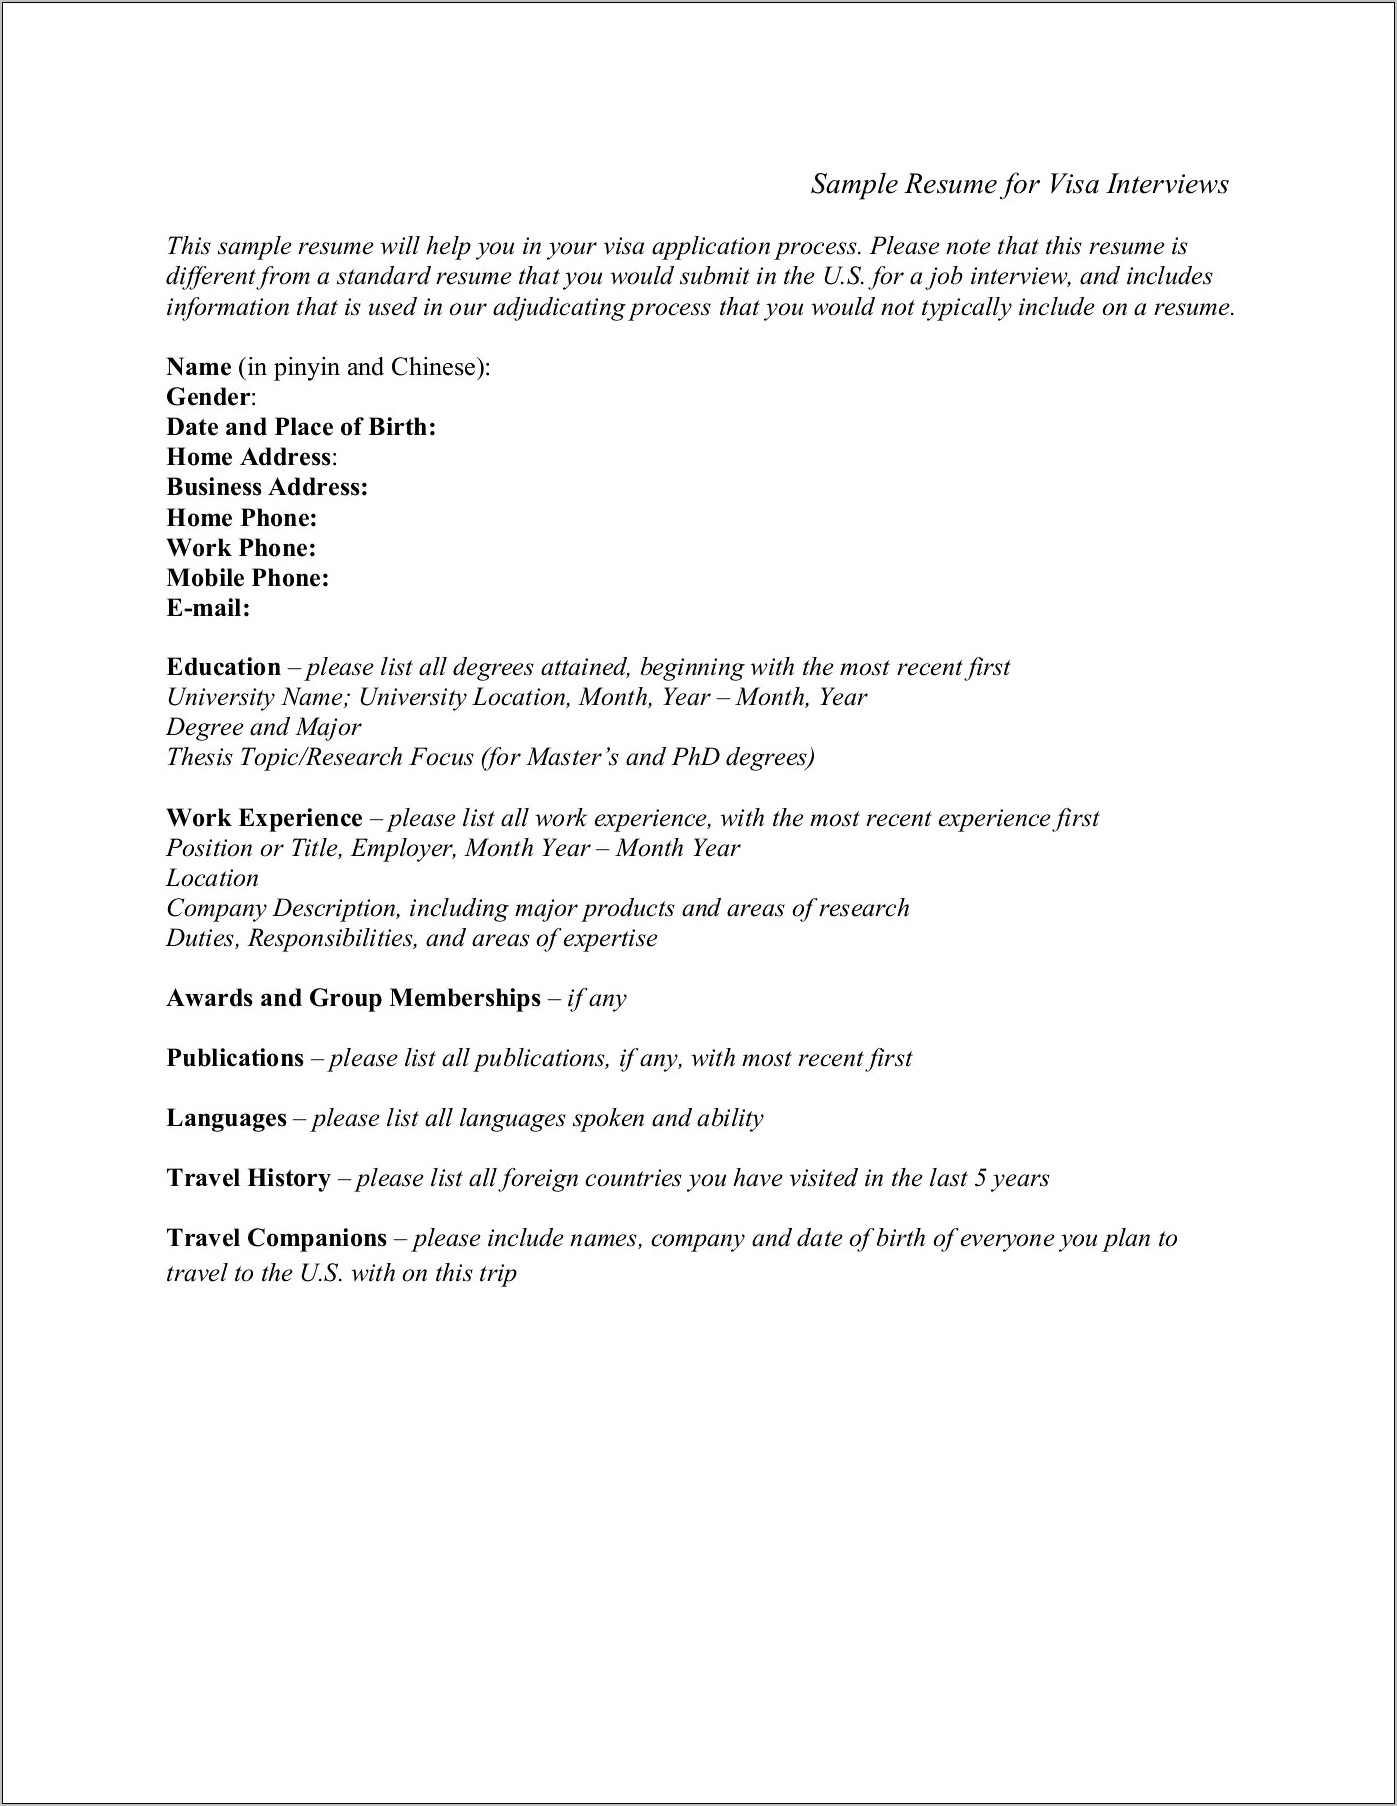 Sample Of Resume While Travelling For A Year